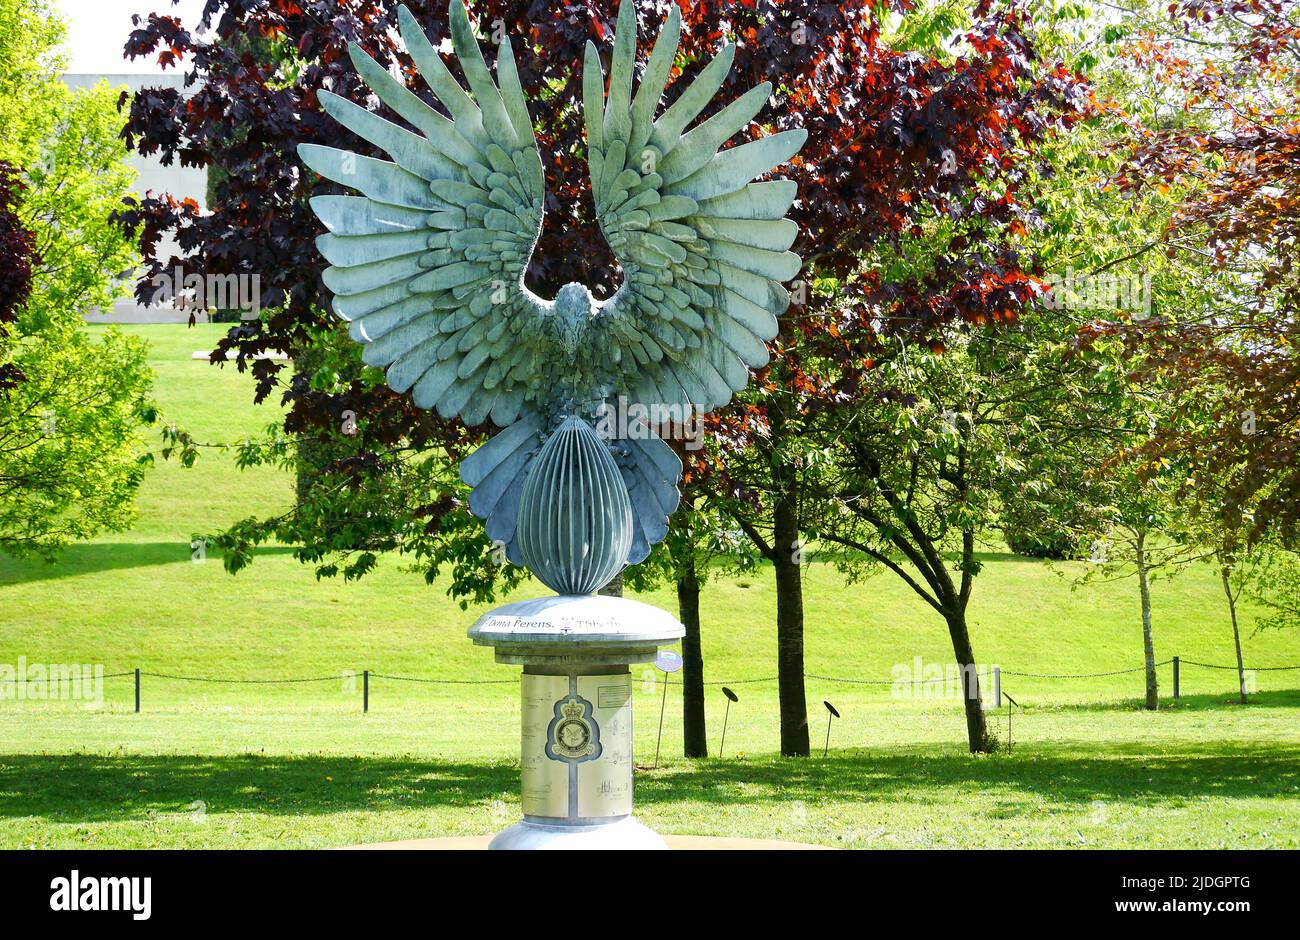 Stone Eagle Statue Bearing Gifts Memorial Dedicated to 216 Squadron (Royal Air Force) at the National Memorial Arboretum, Staffordshire, England, UK. Stock Photo